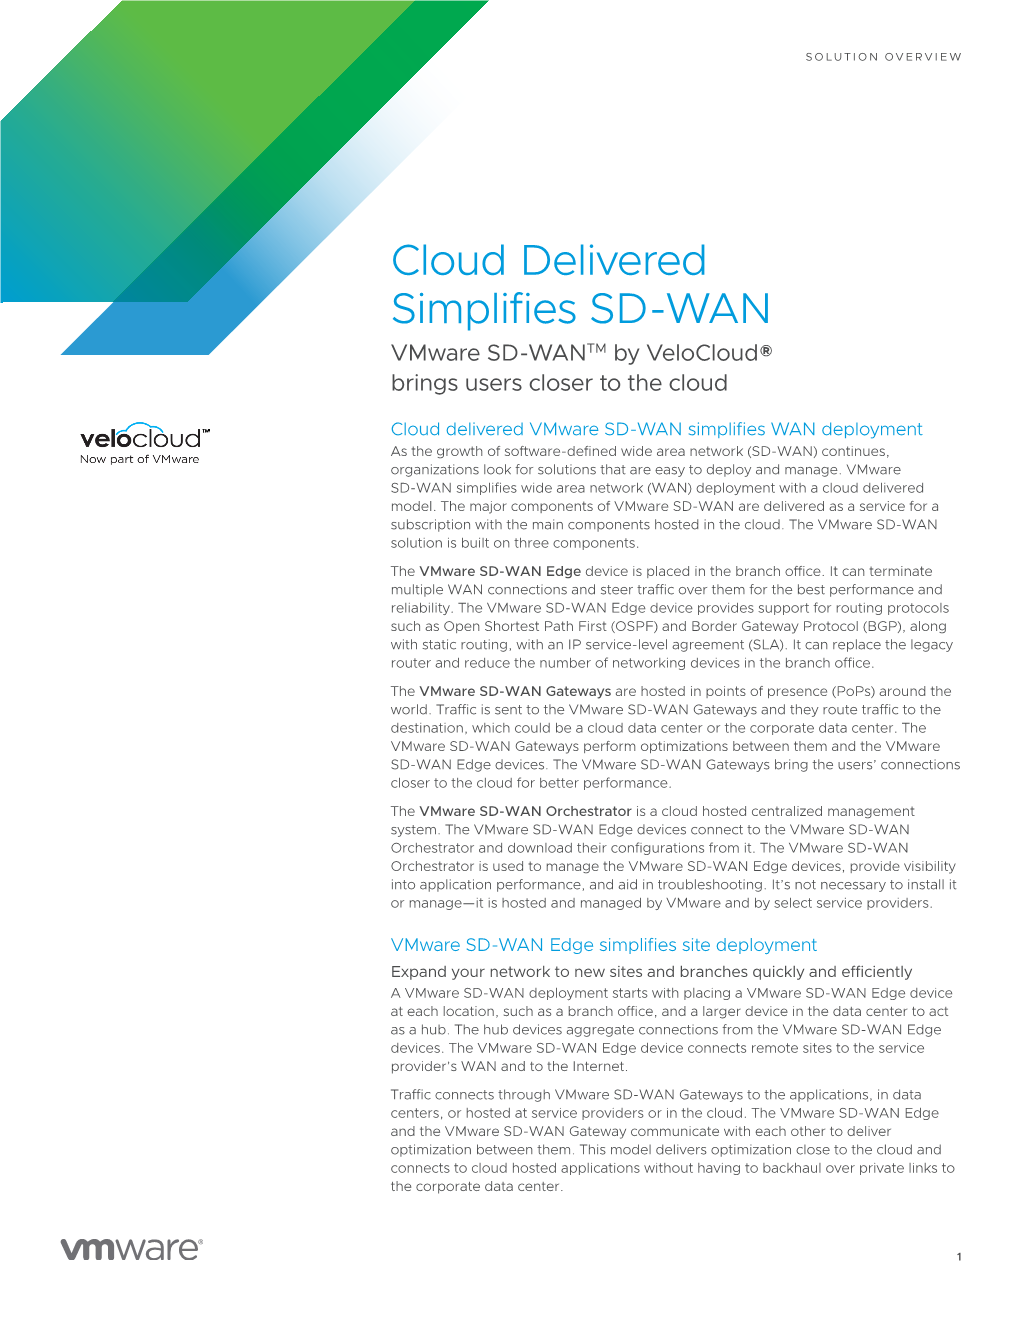 Cloud Delivered Simplifies SD-WAN Vmware SD-WANTM by Velocloud® Brings Users Closer to the Cloud